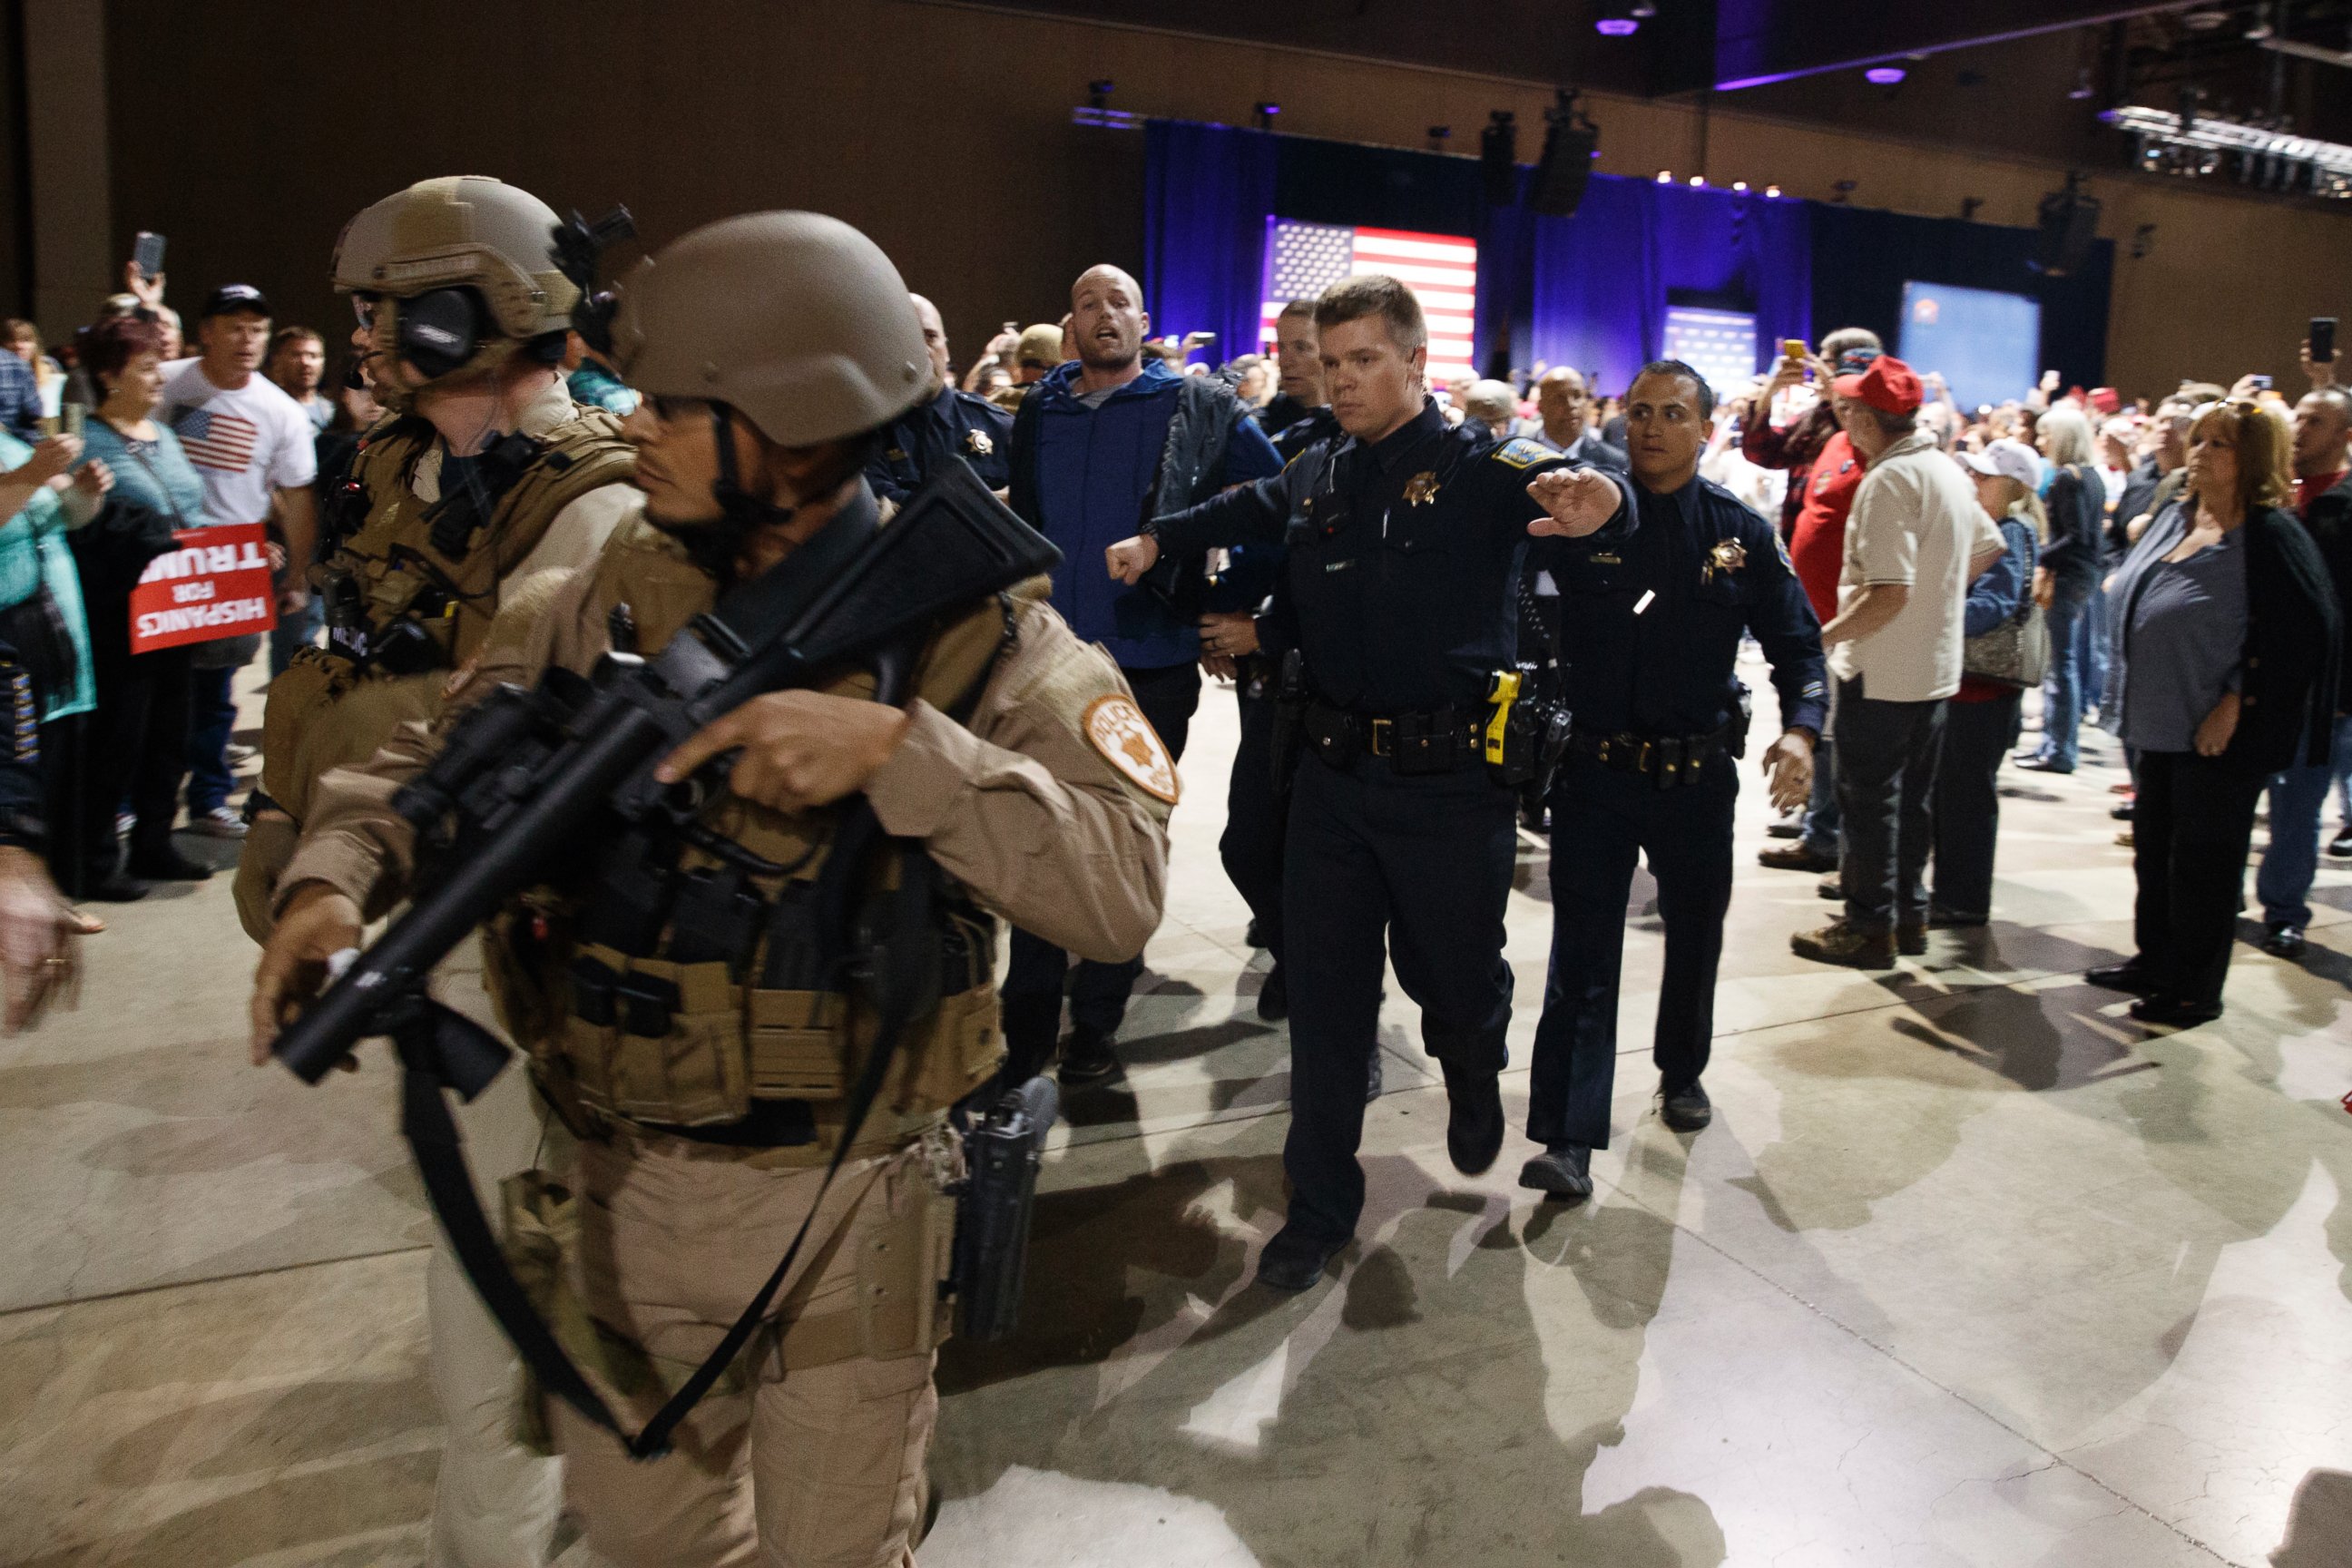 PHOTO: A man, at center with blue sweater, is escorted by law enforcement officers moments after Republican presidential candidate Donald Trump was rushed offstage by Secret Service agents during a campaign rally in Reno, Nev., on Saturday, Nov. 5, 2016.